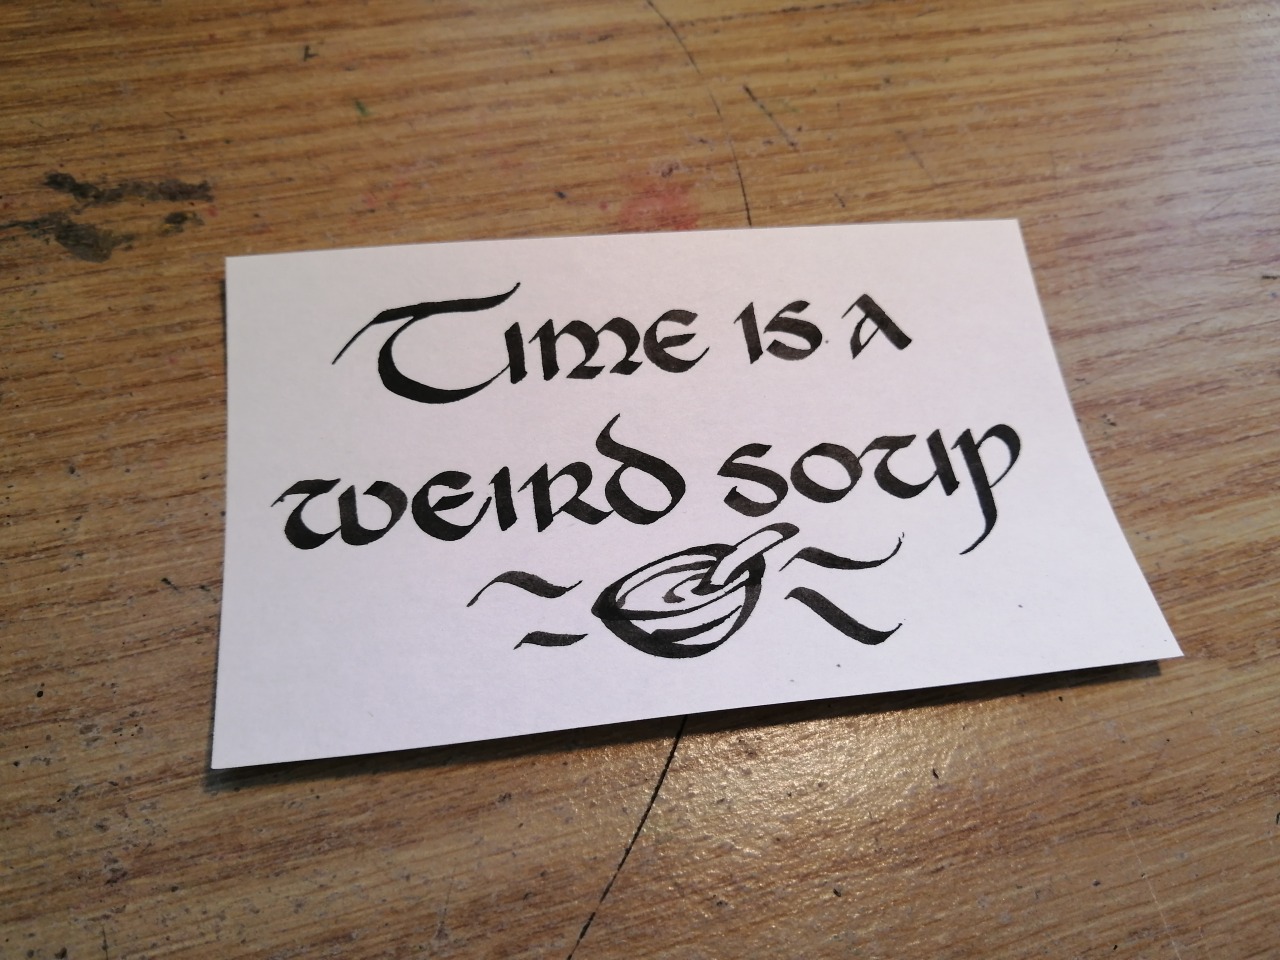 theshitpostcalligrapher:
“req’d by @unlettered-heathen
ultimately true
text: Time is a weird soup
”